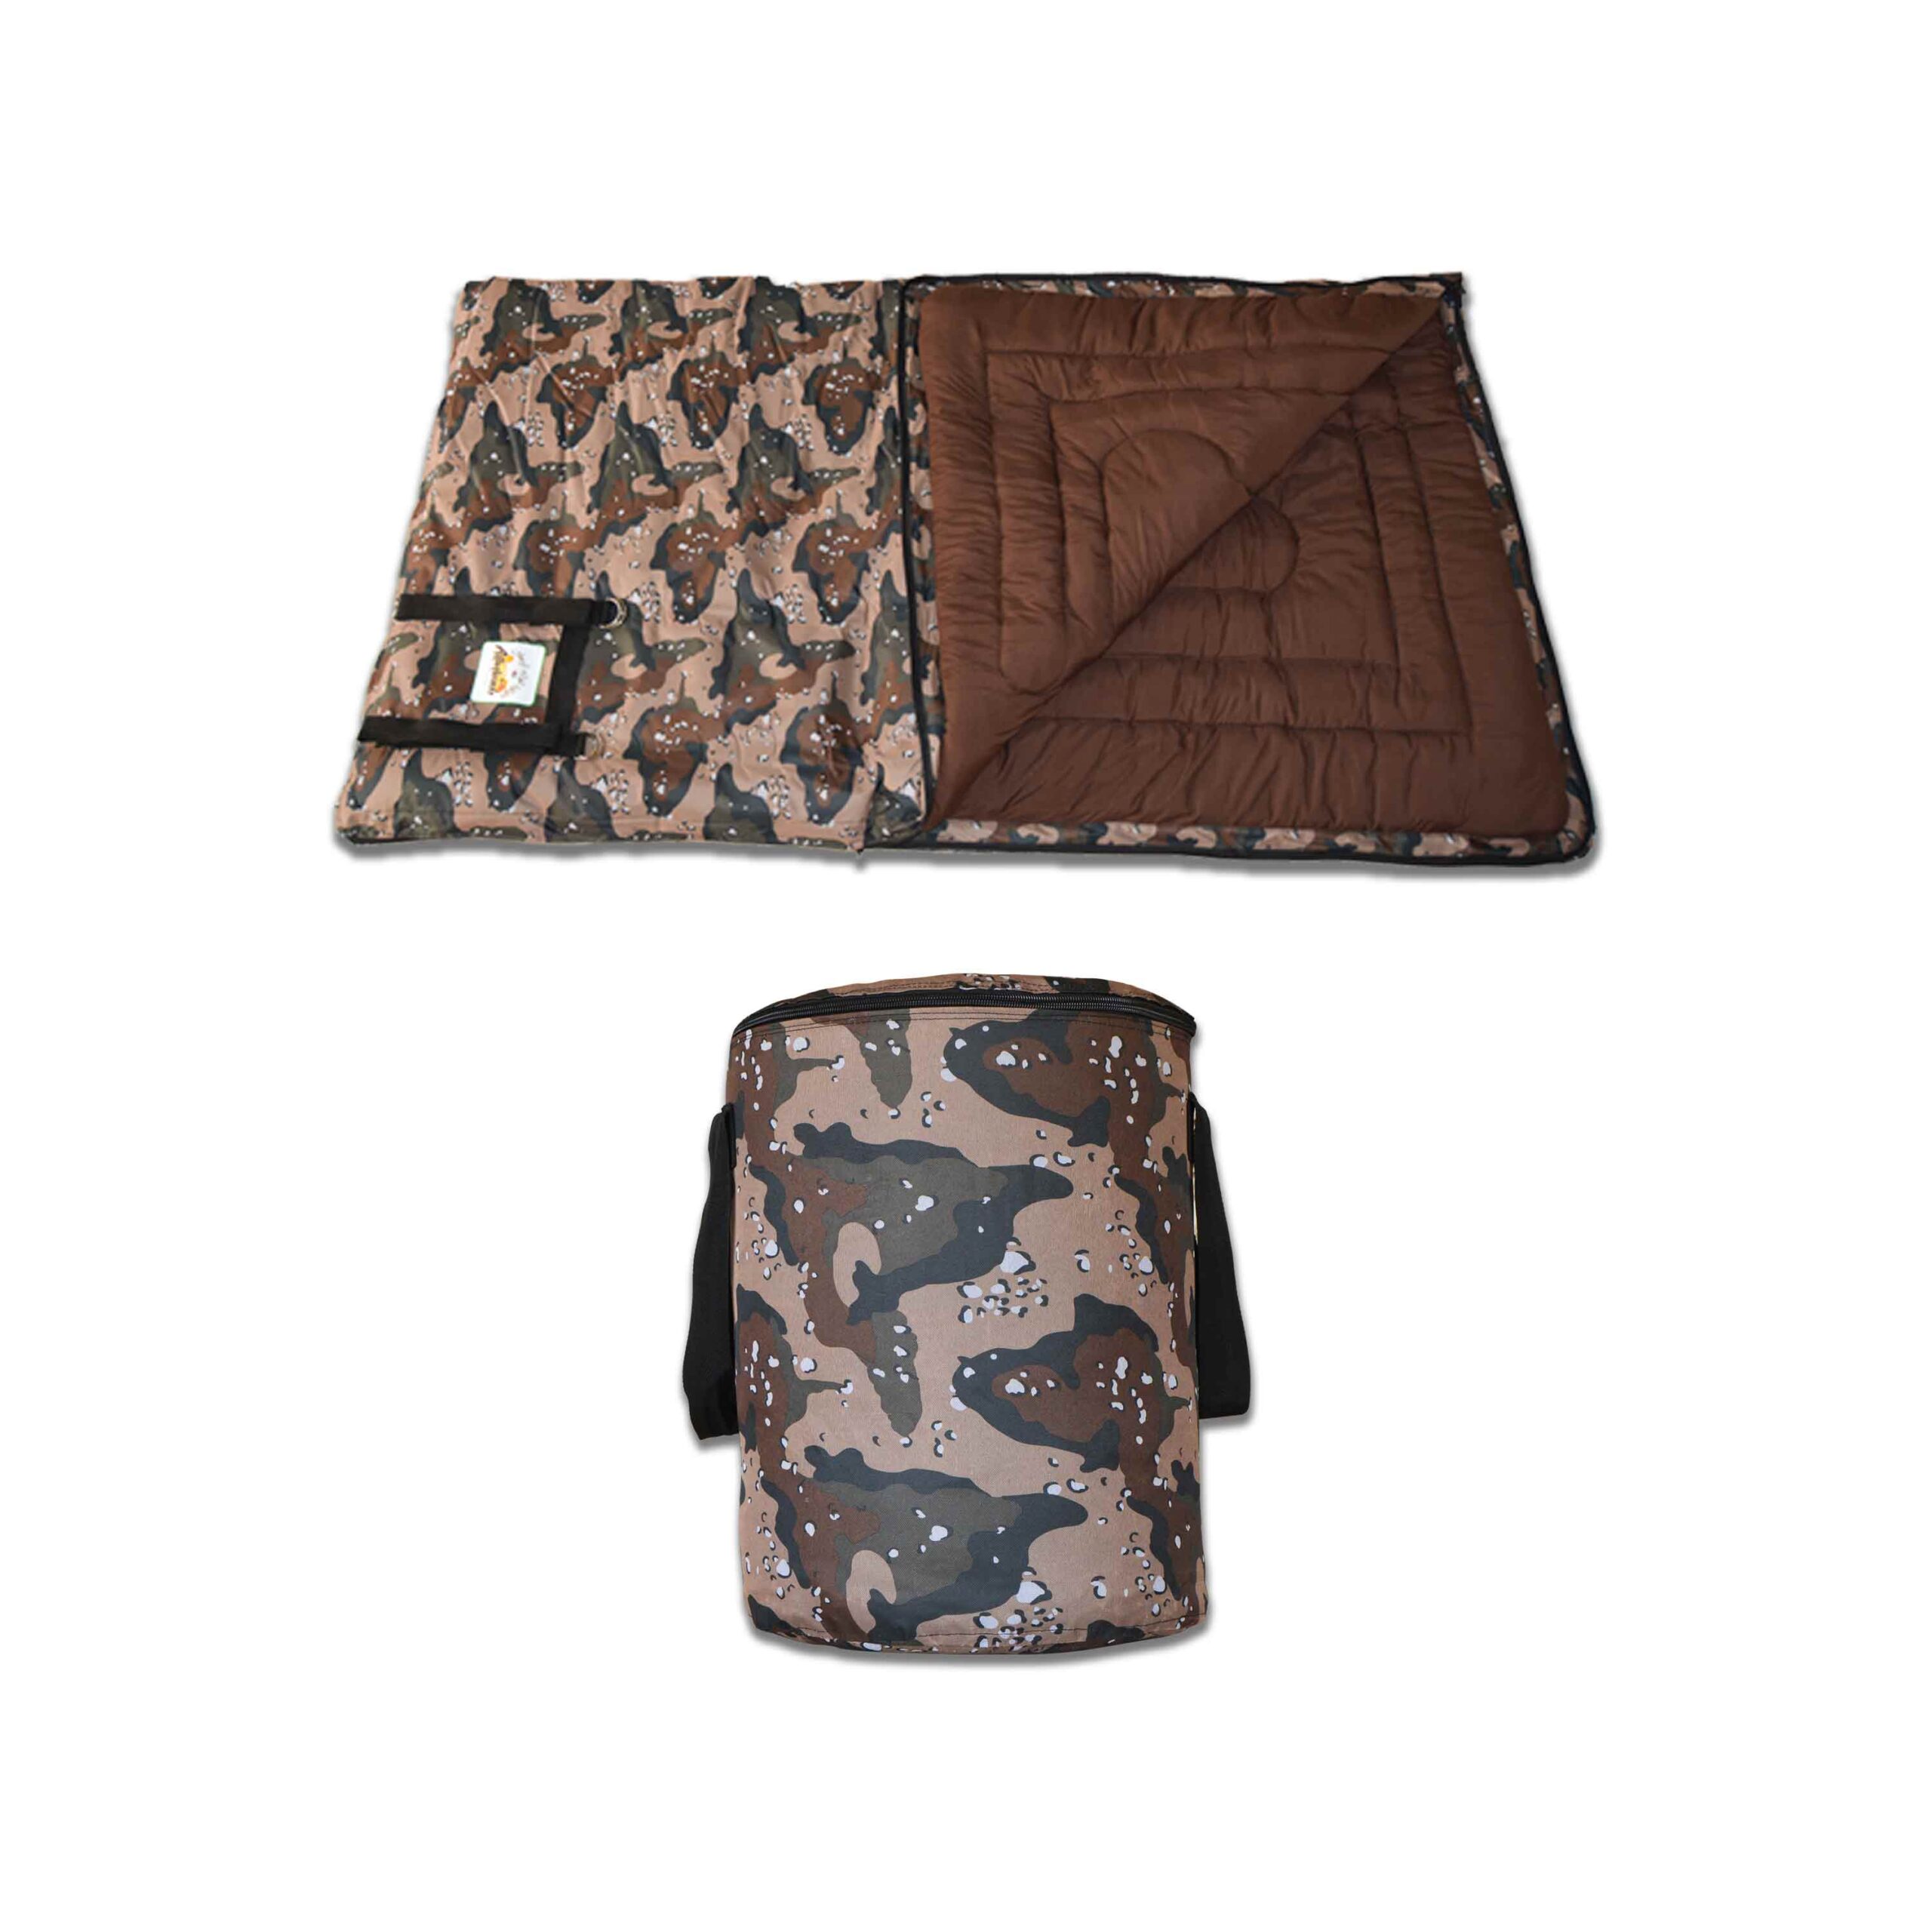 Sleeping bag, Army style - Alluluah Picnic Accessories